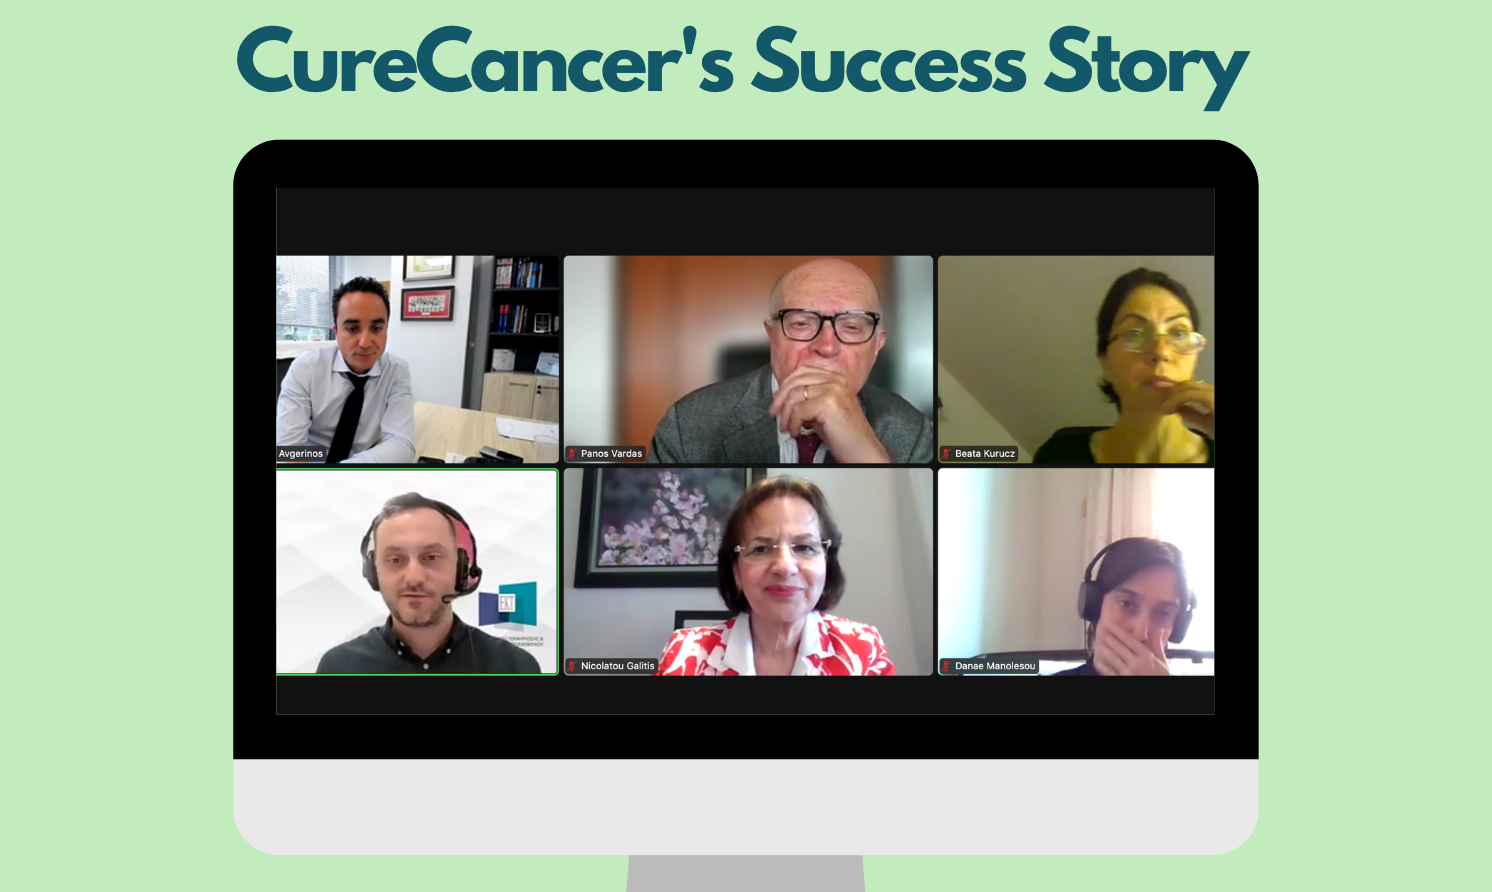 The Success Story of CureCancer - mycancer.gr: A how-to guide